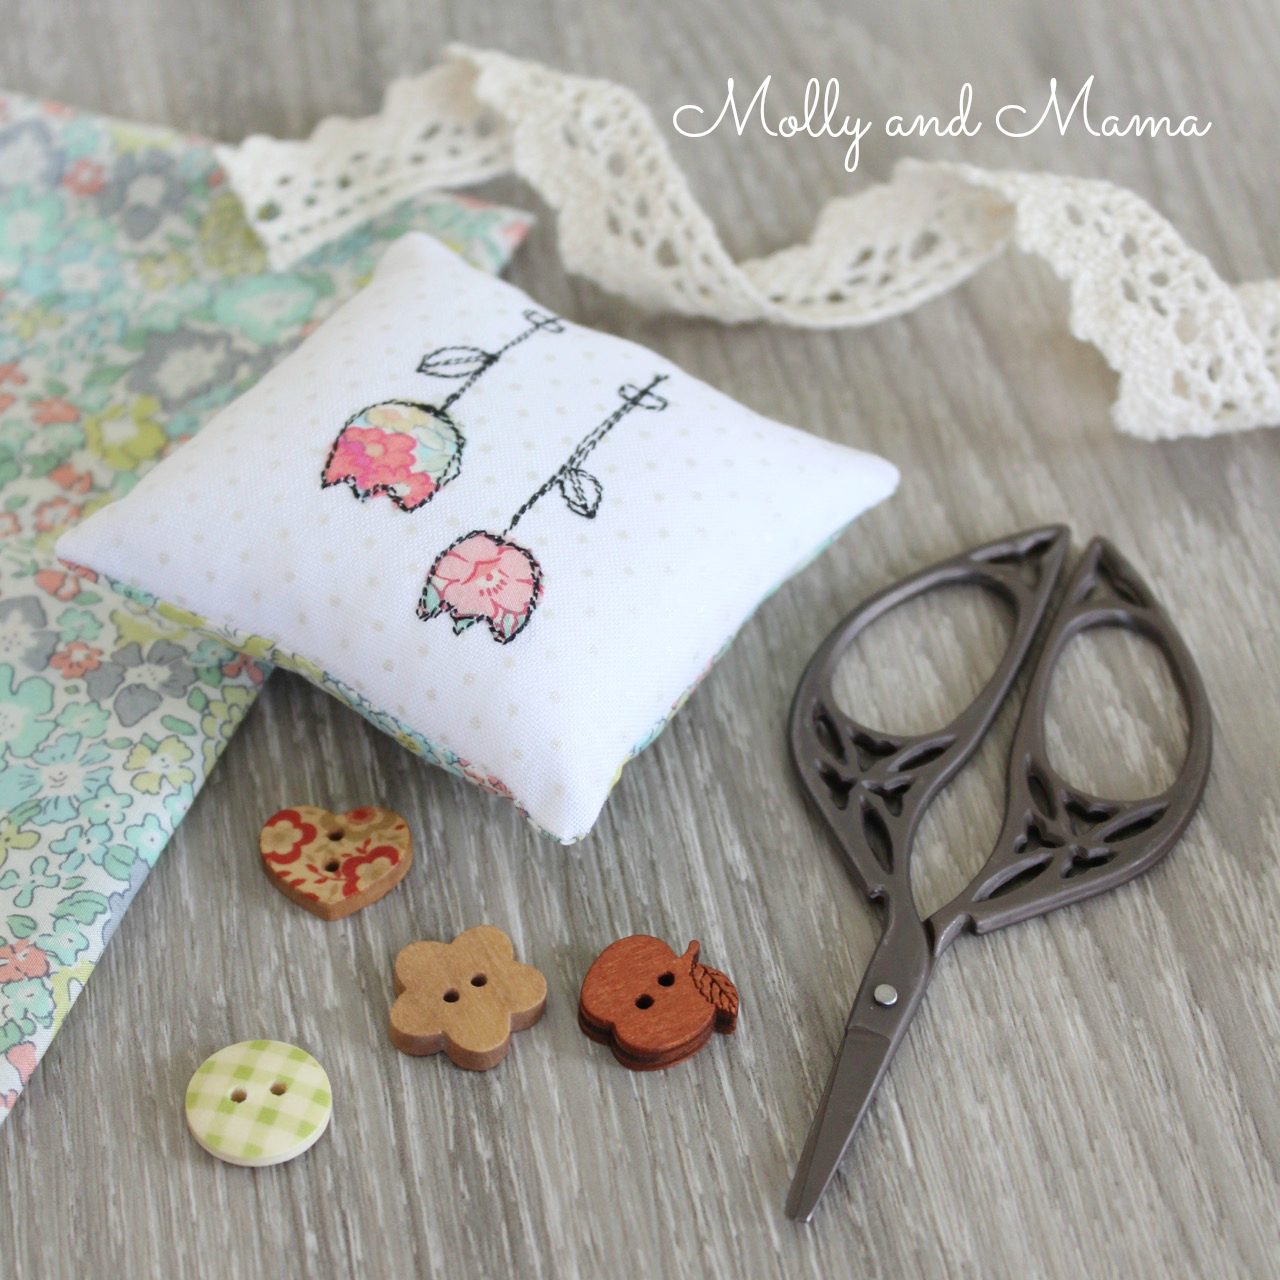 January Makes – sewing in the new year